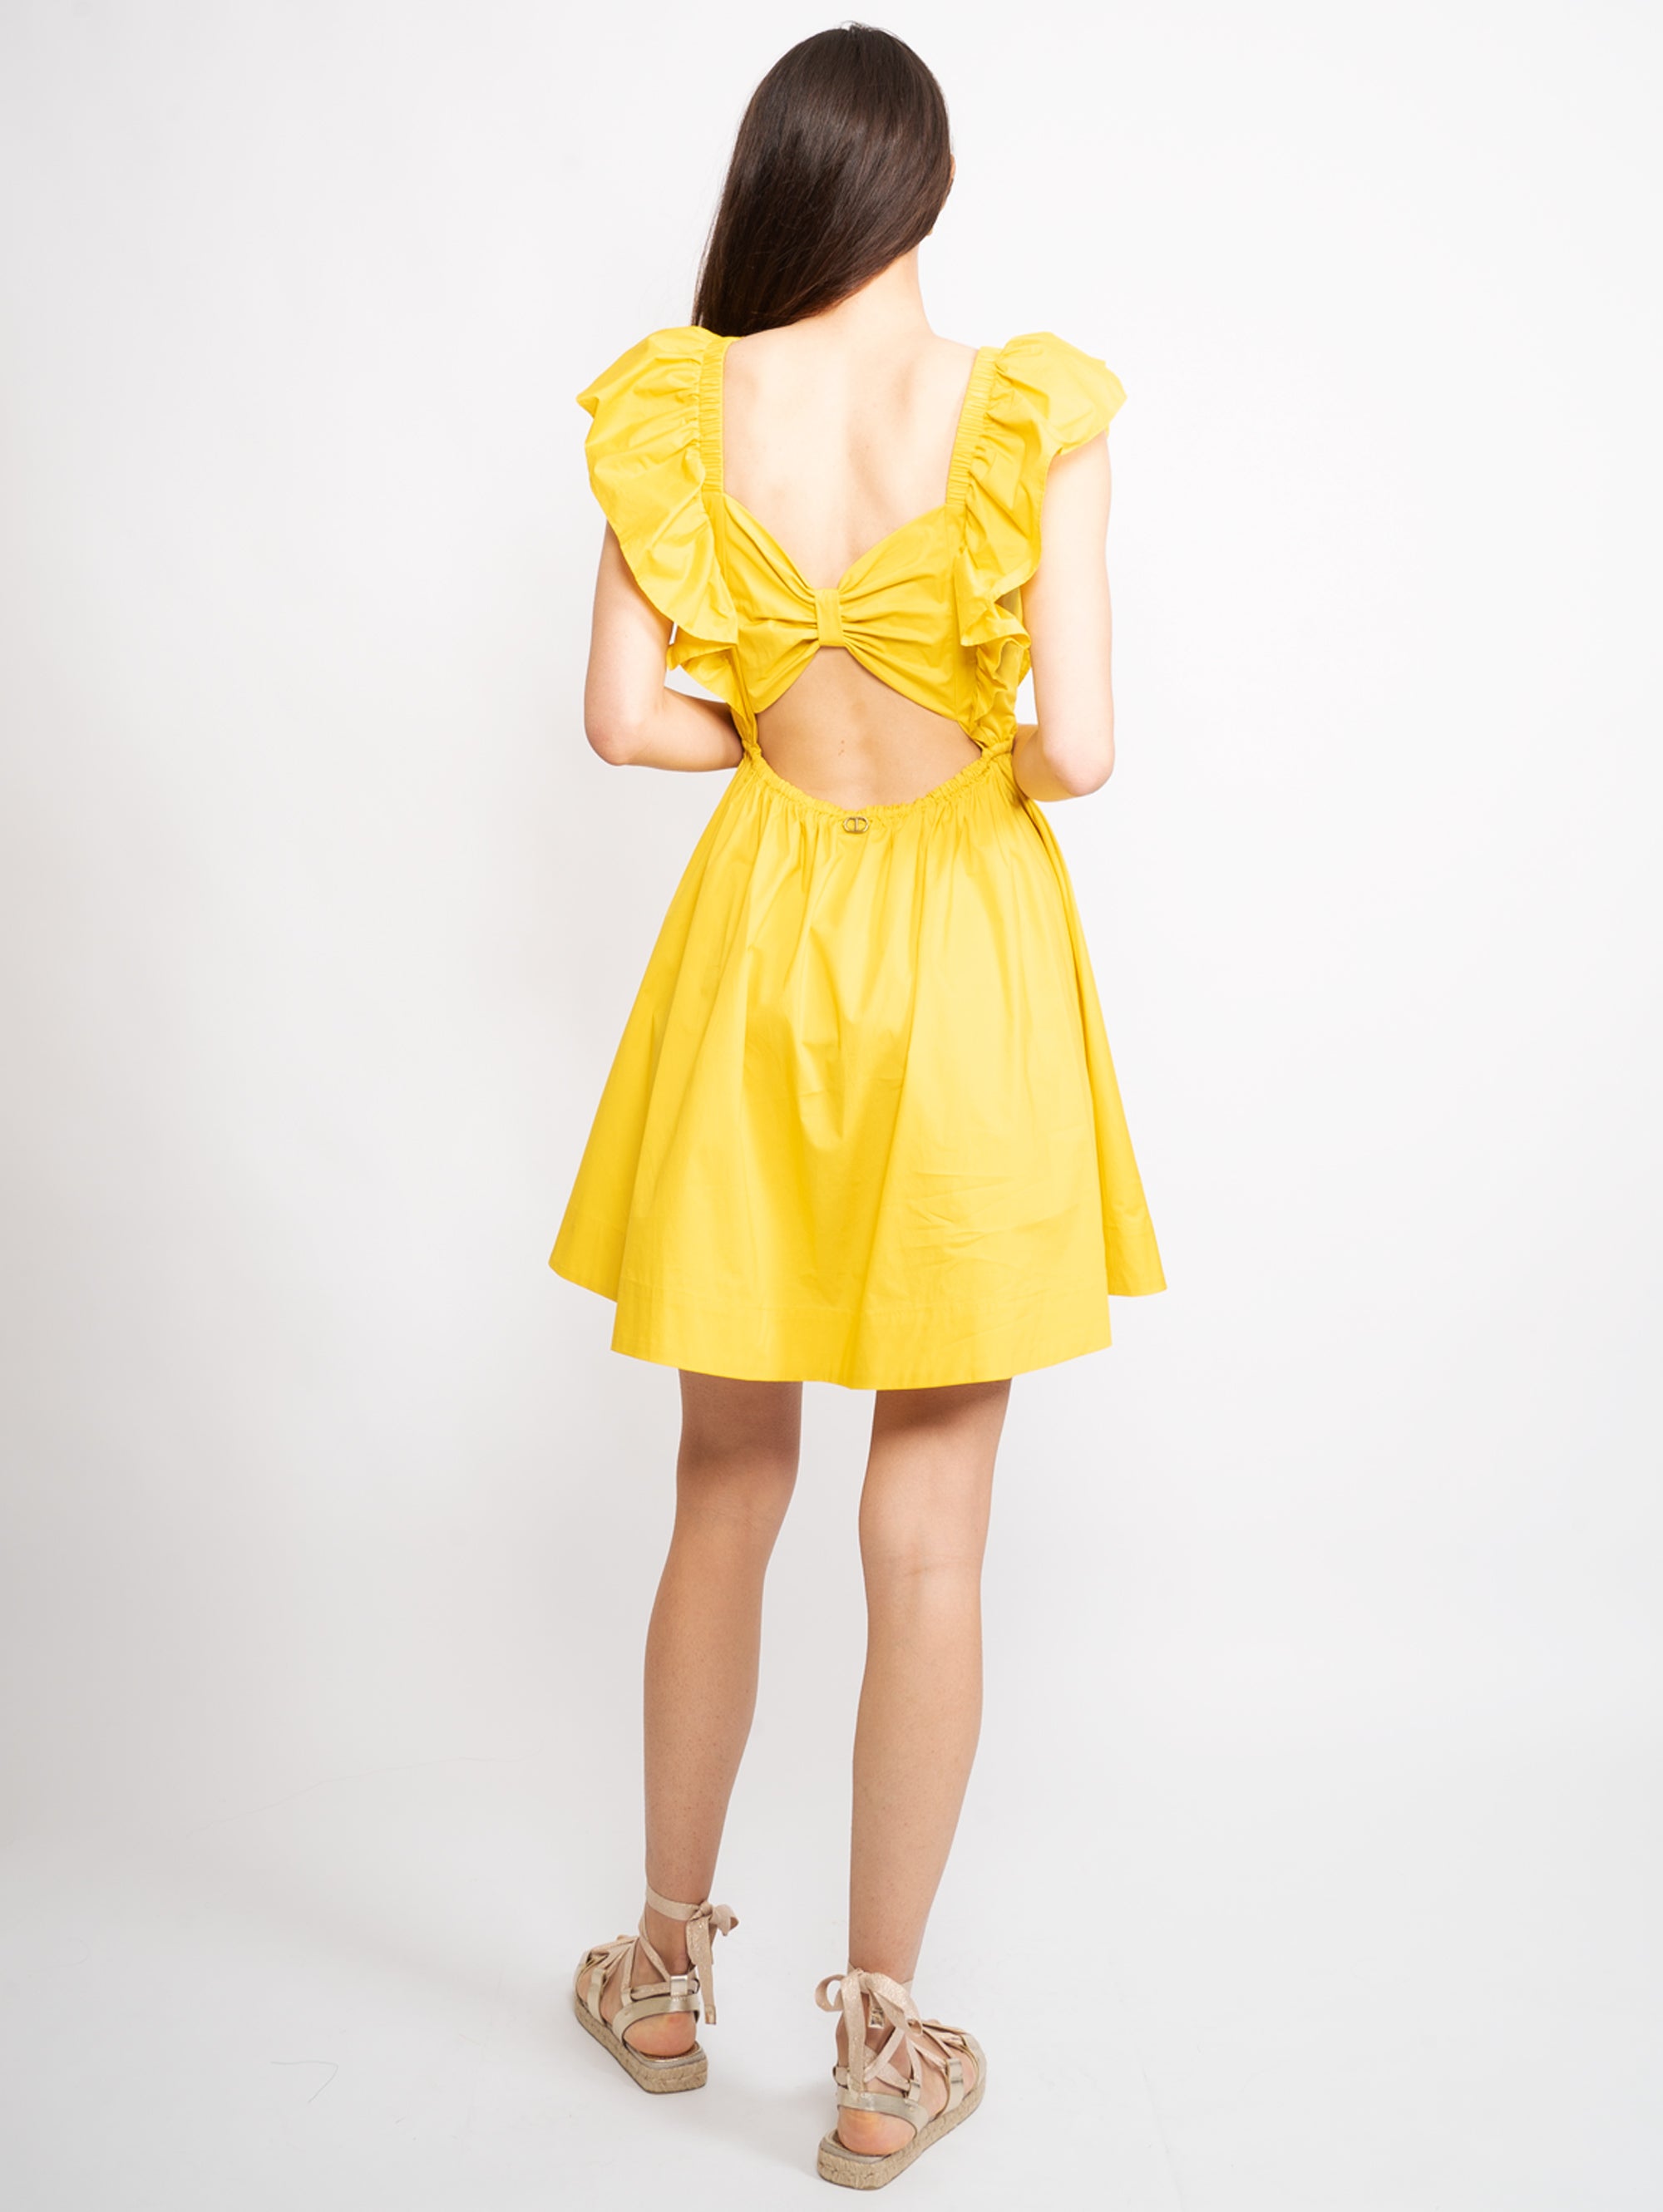 Dress with Yellow Bow